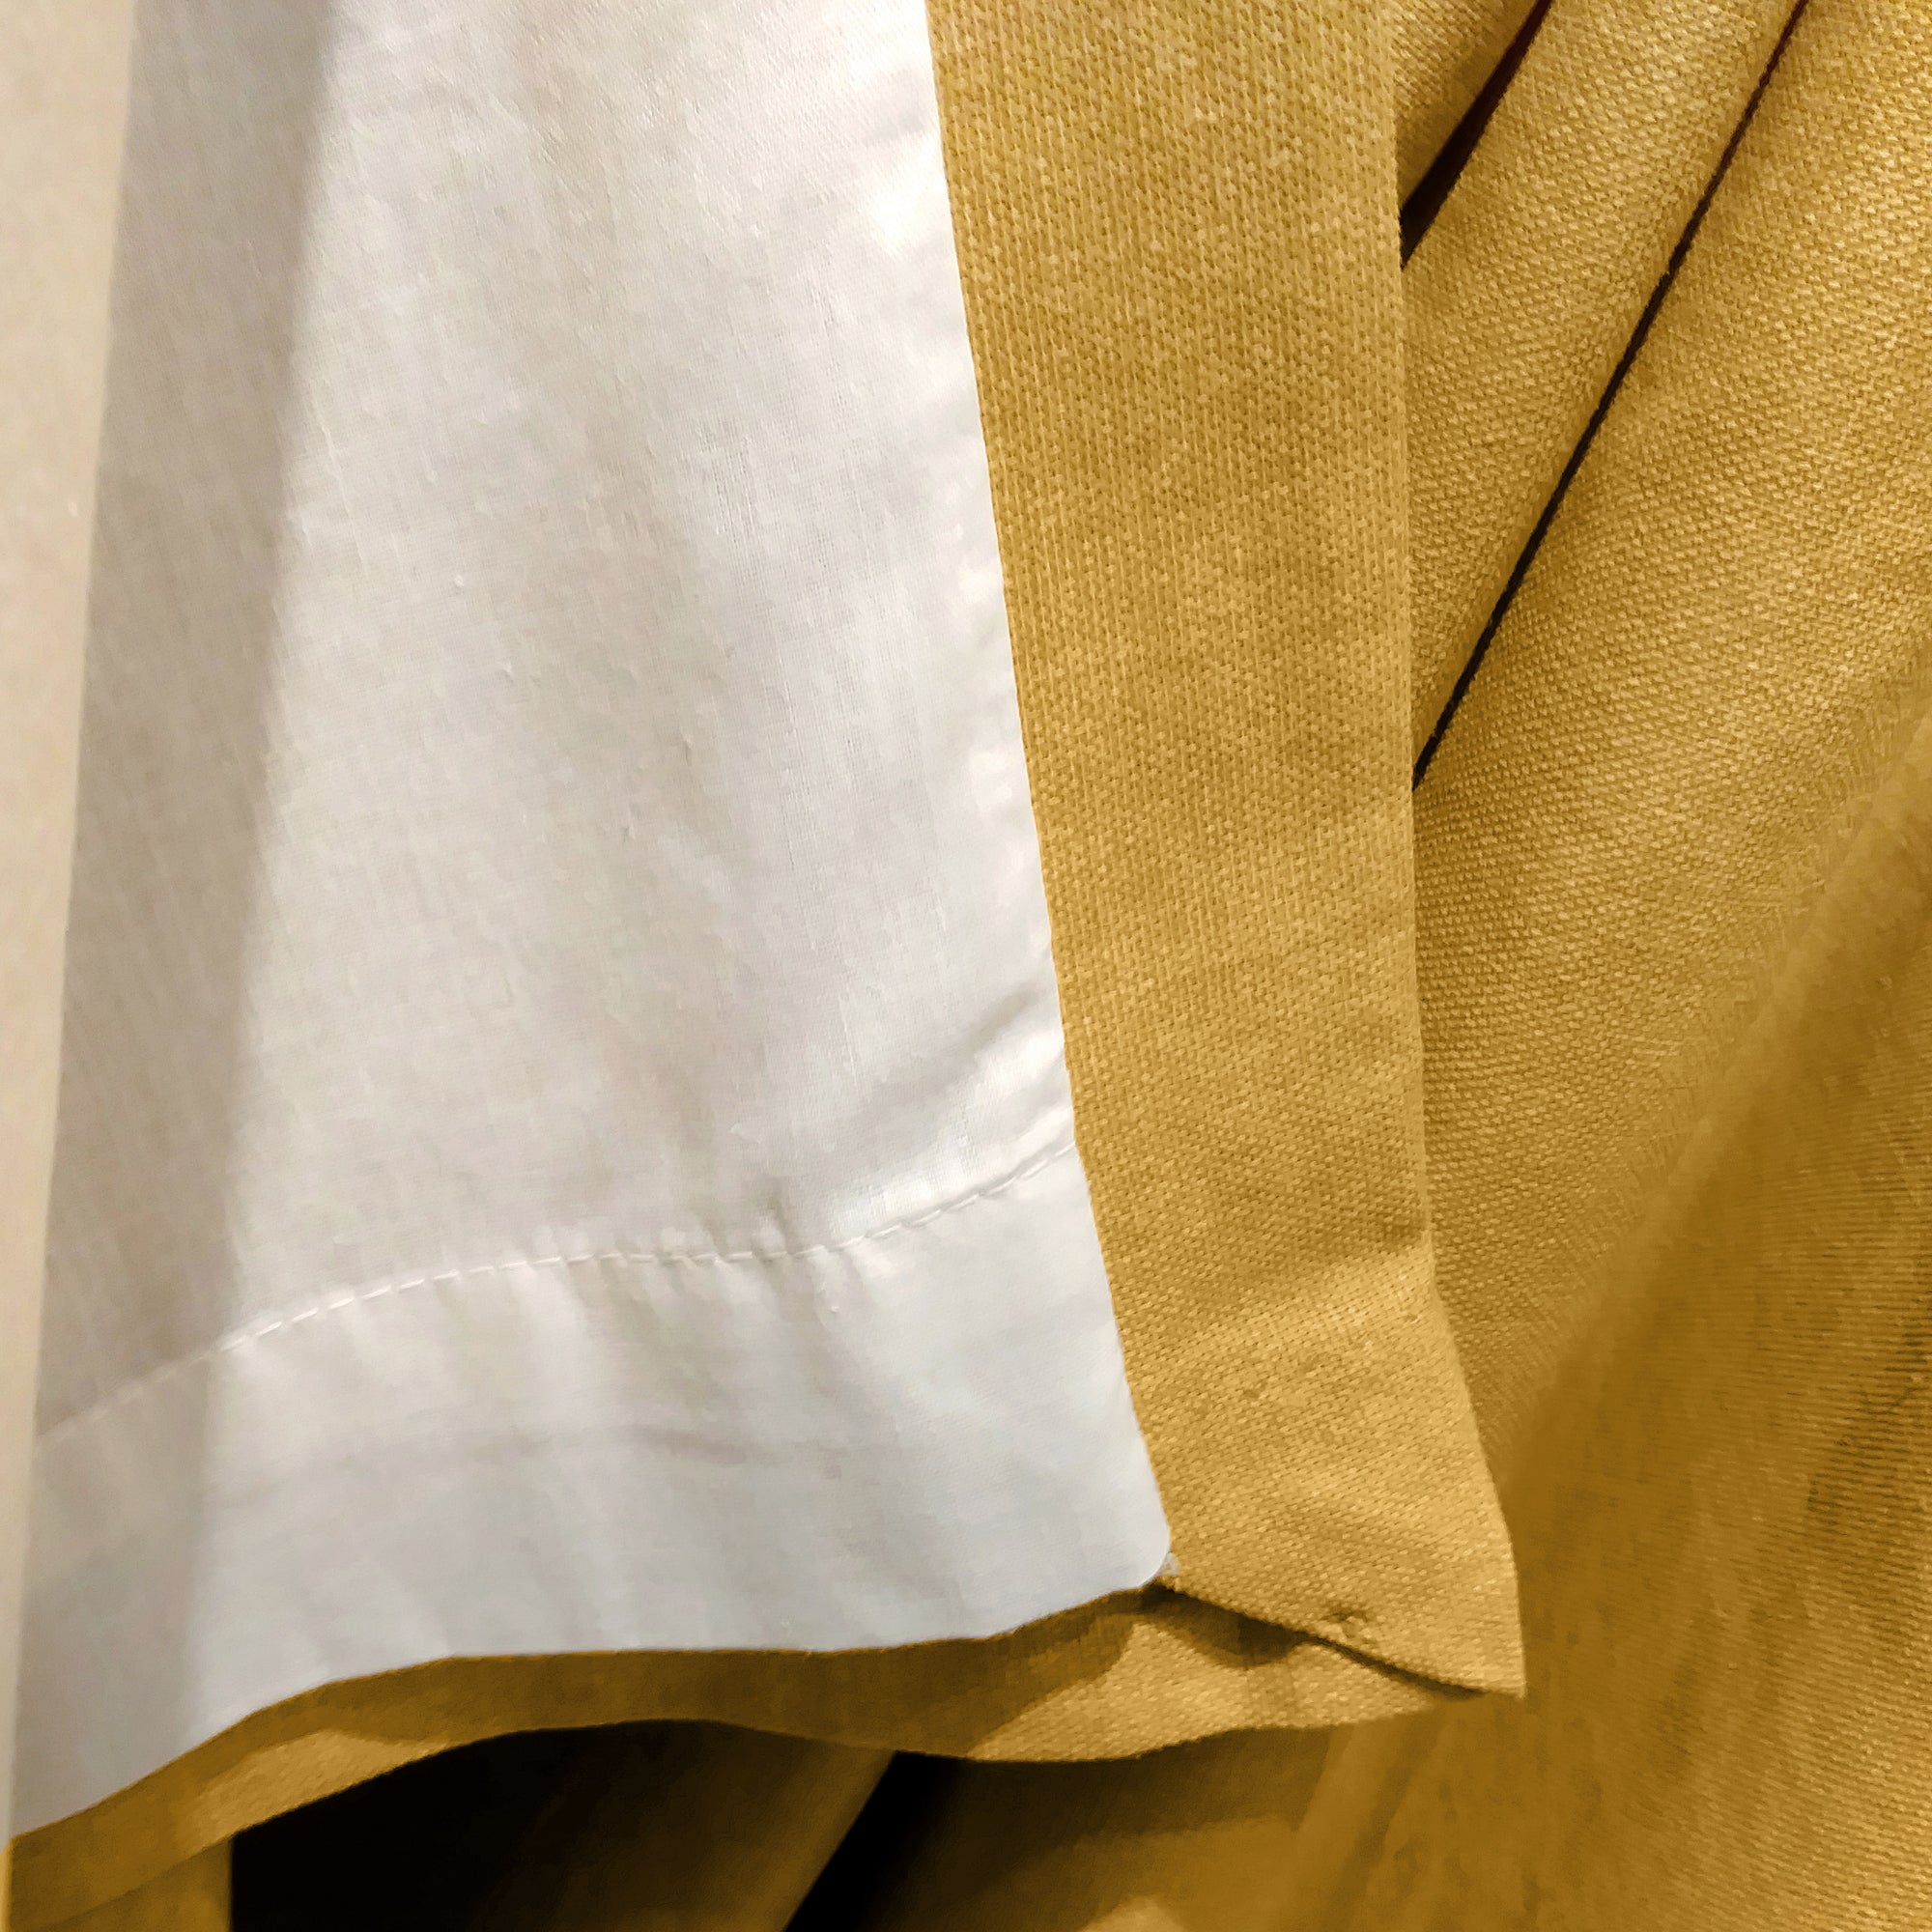 Sorbonne - 100% Cotton Lined Eyelet Curtains in Ochre - by Fusion